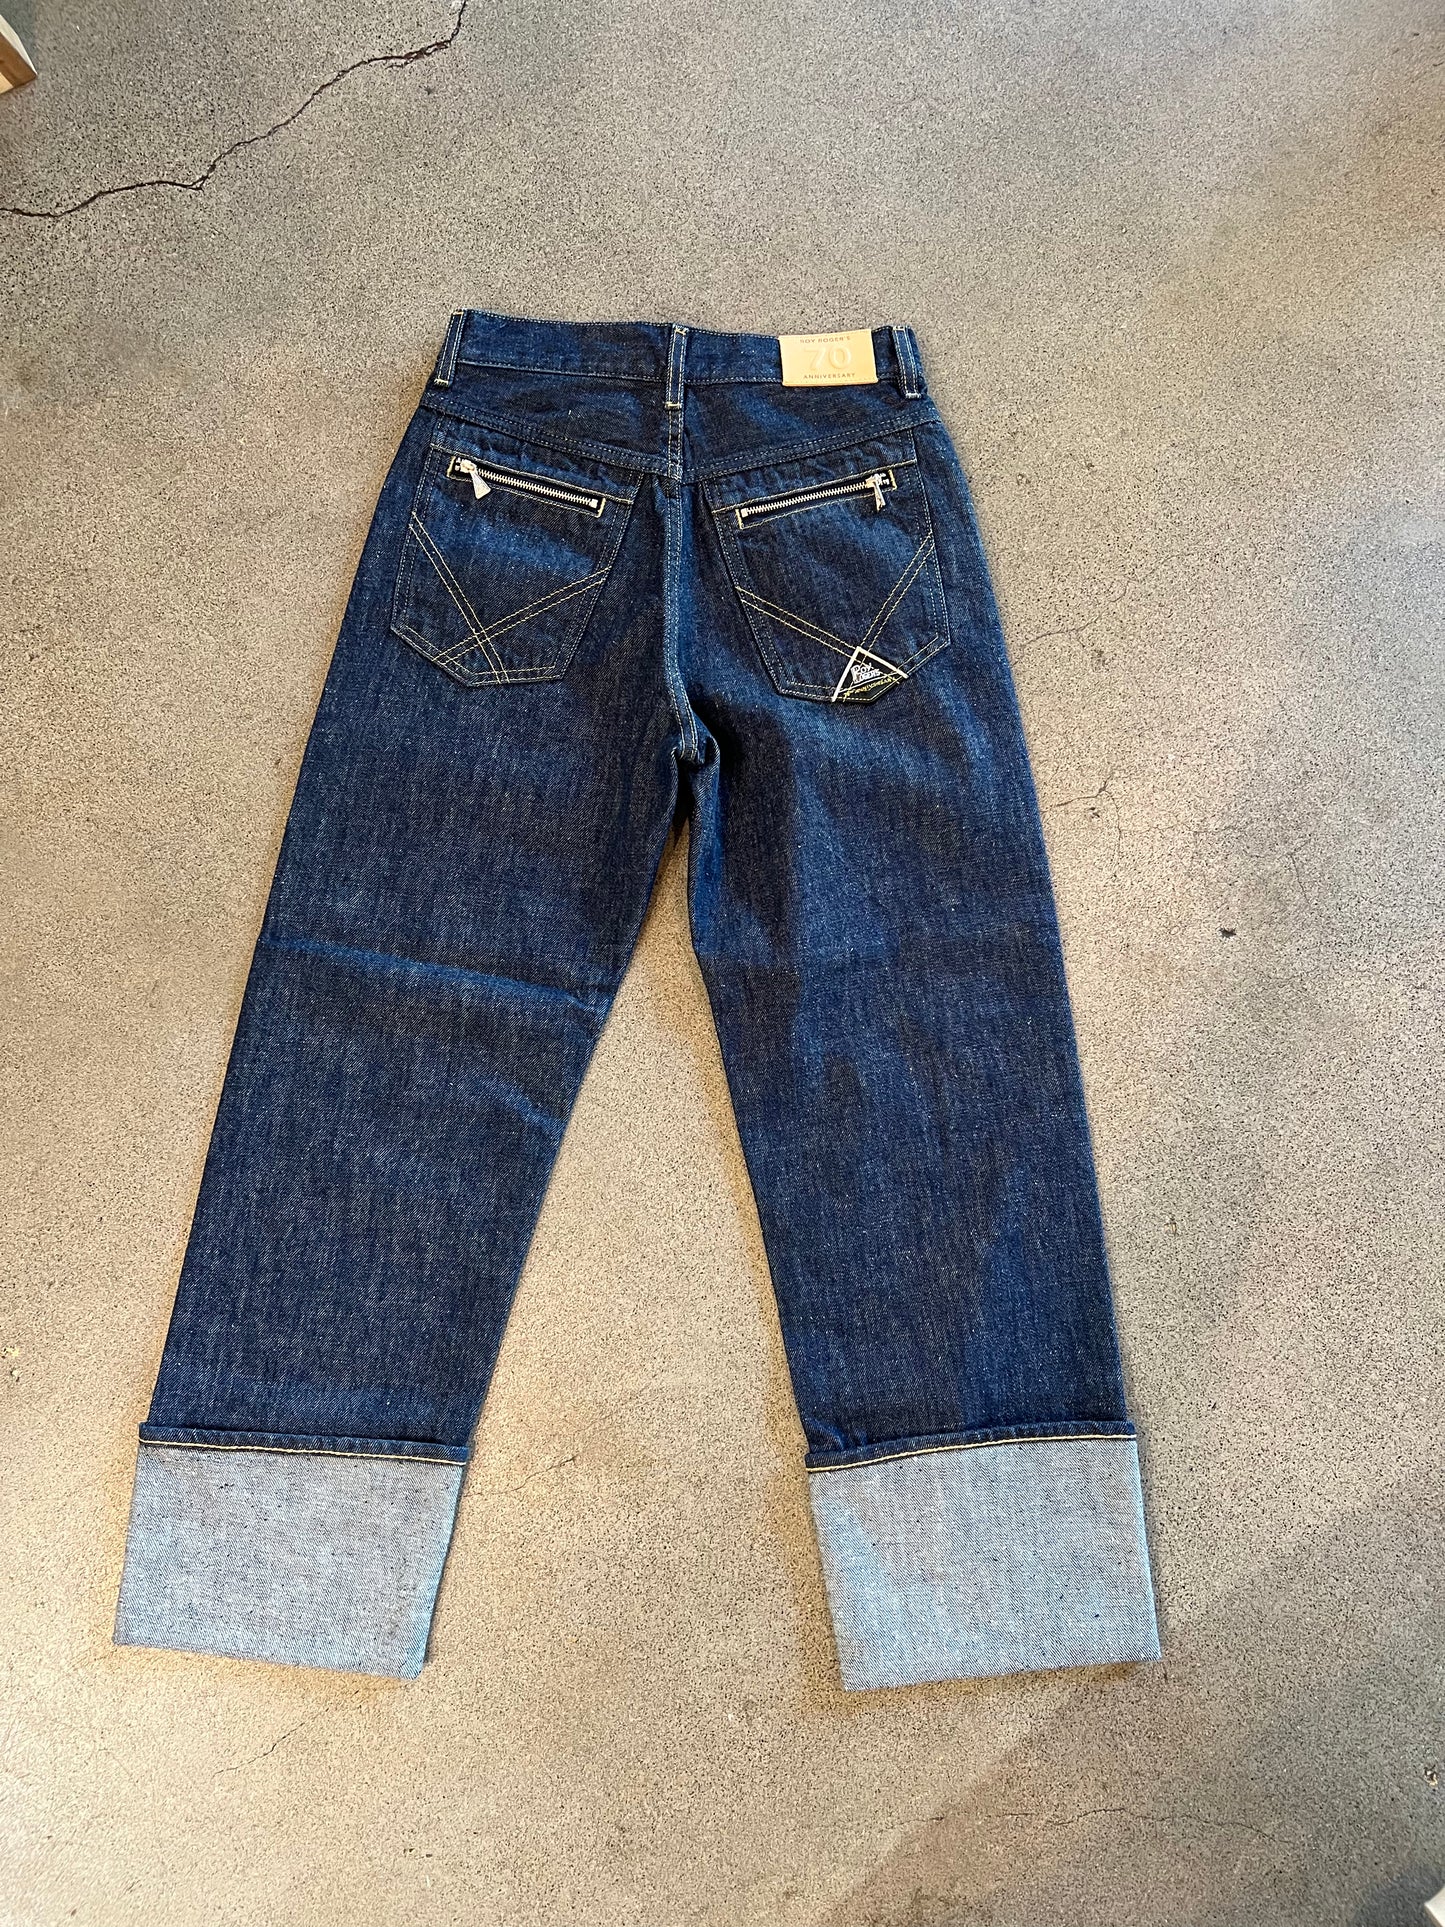 Roy Rogers- Jeans Normale 70th Woman Denim Cimosa Rinse